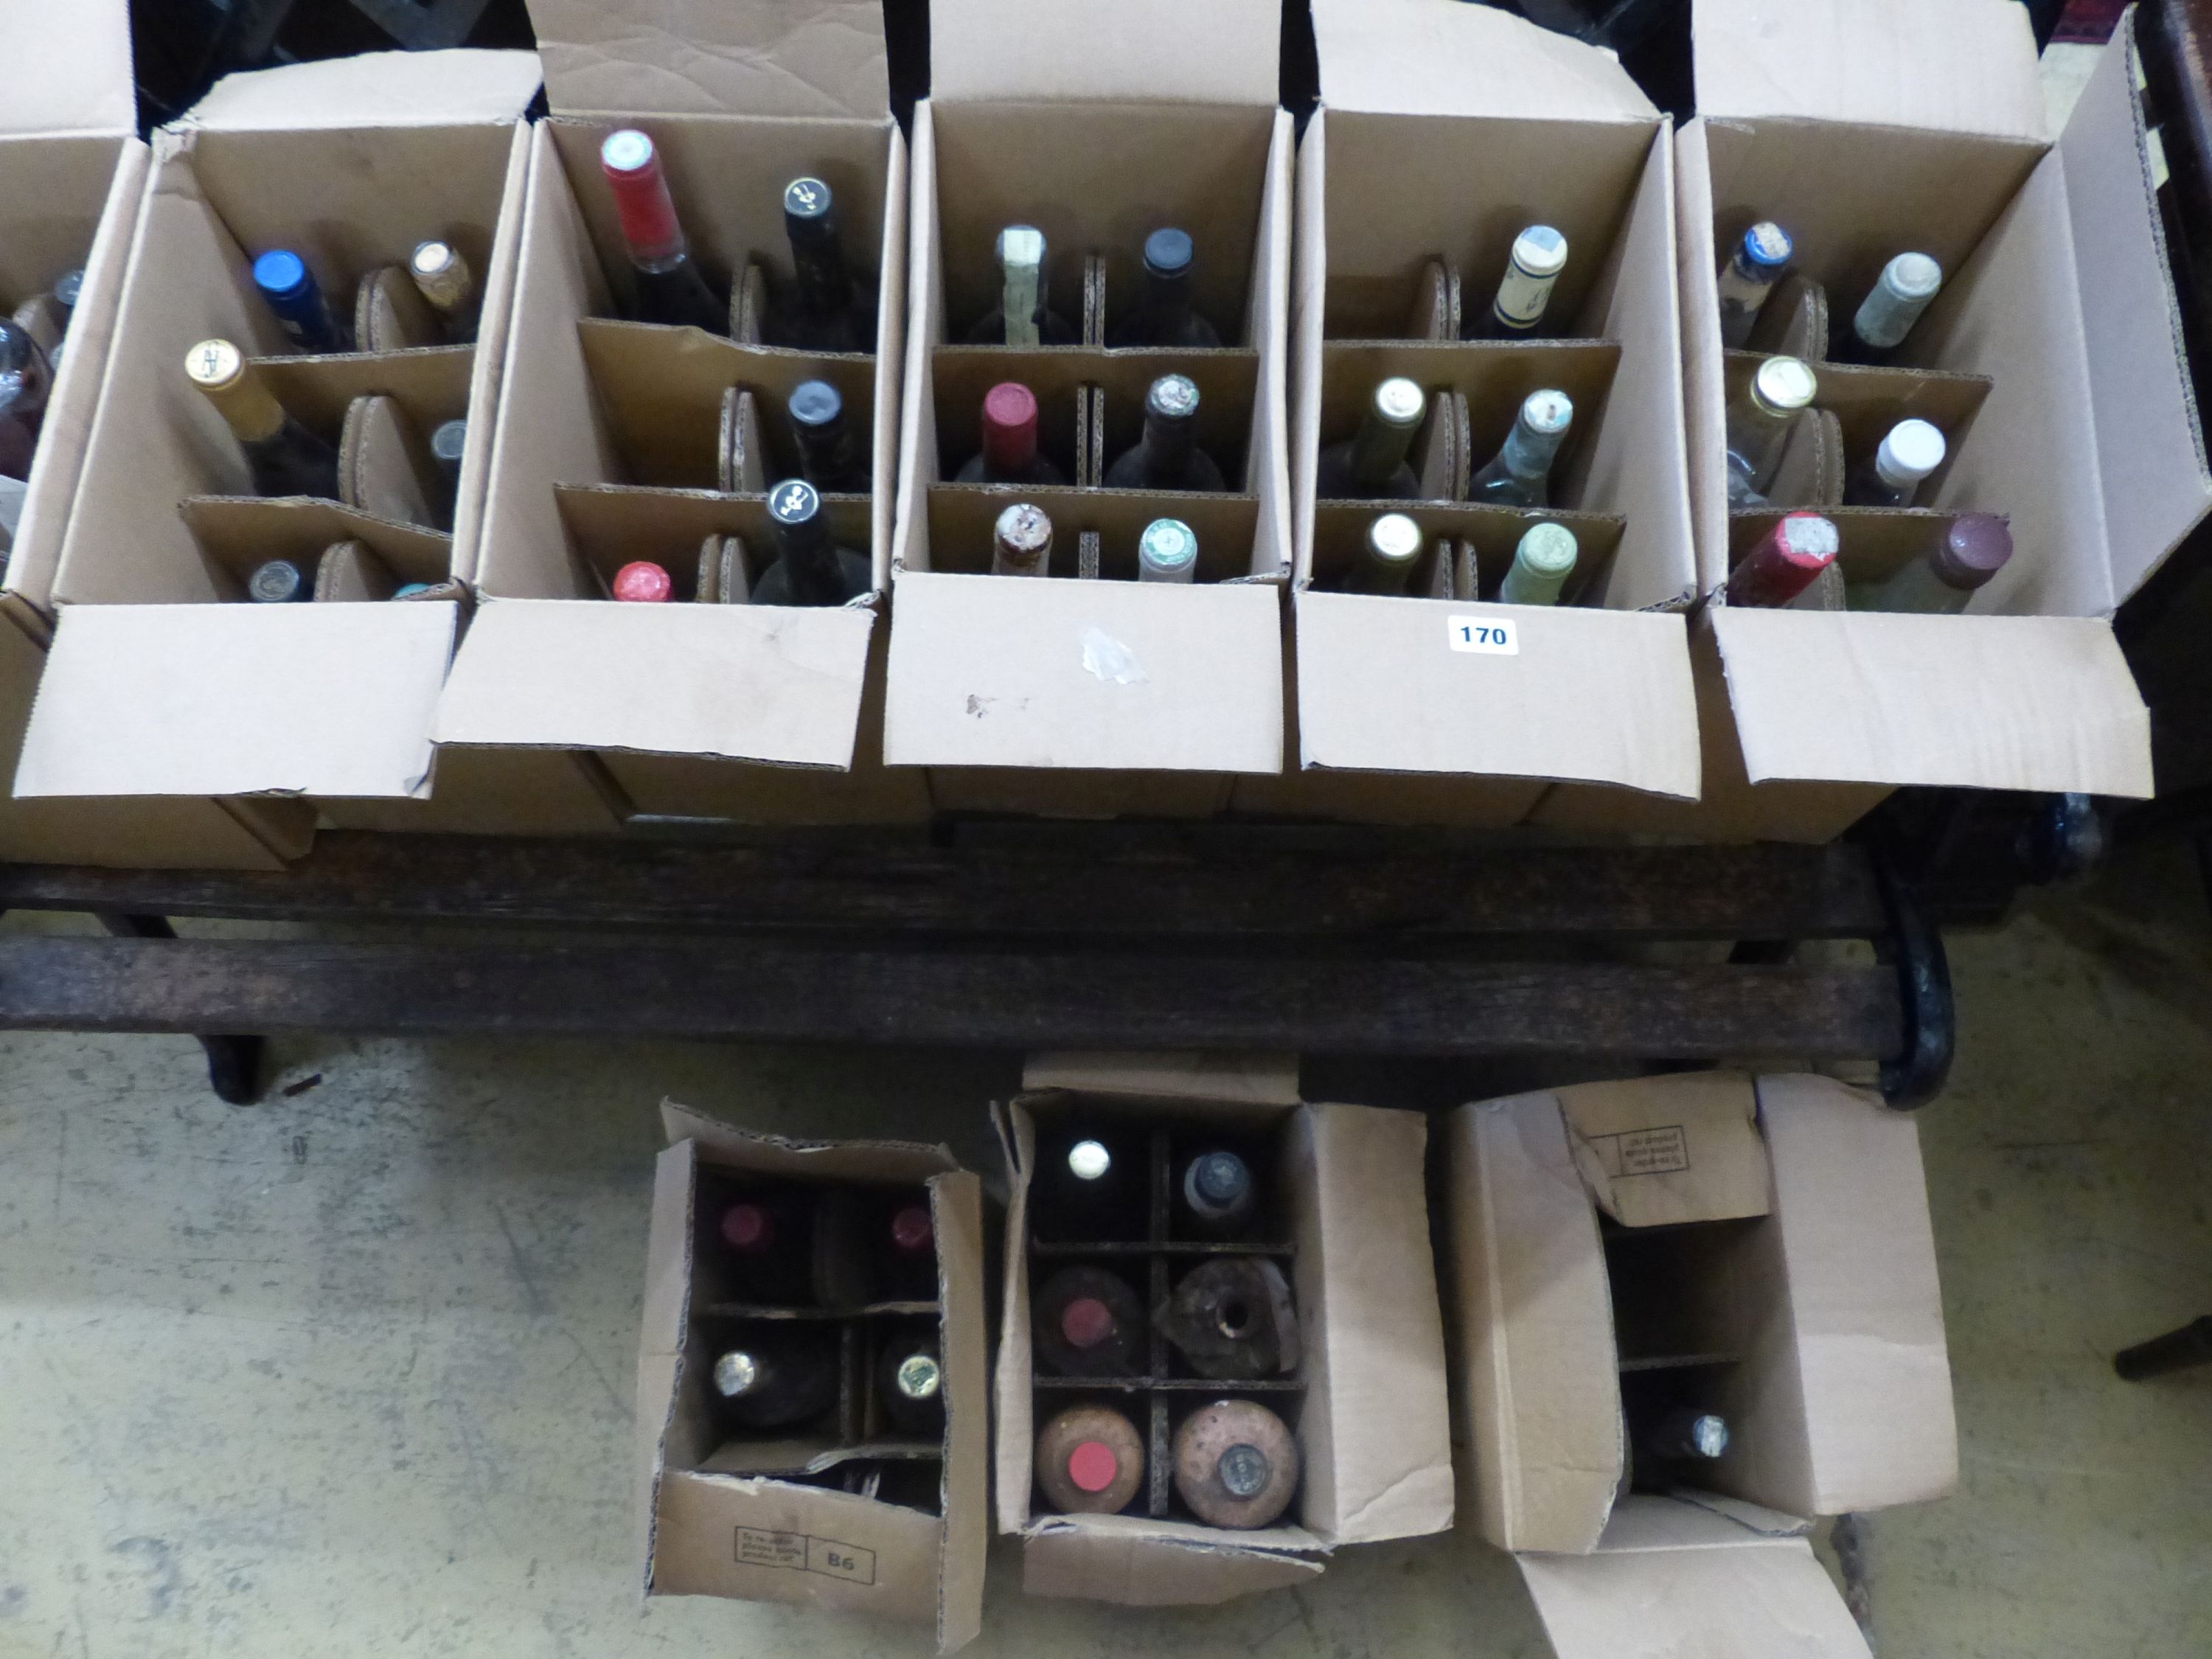 Approximately 74 bottles of assorted wines and spirits including Cahors 1978, Chateau du Cricastin 1979, etc.